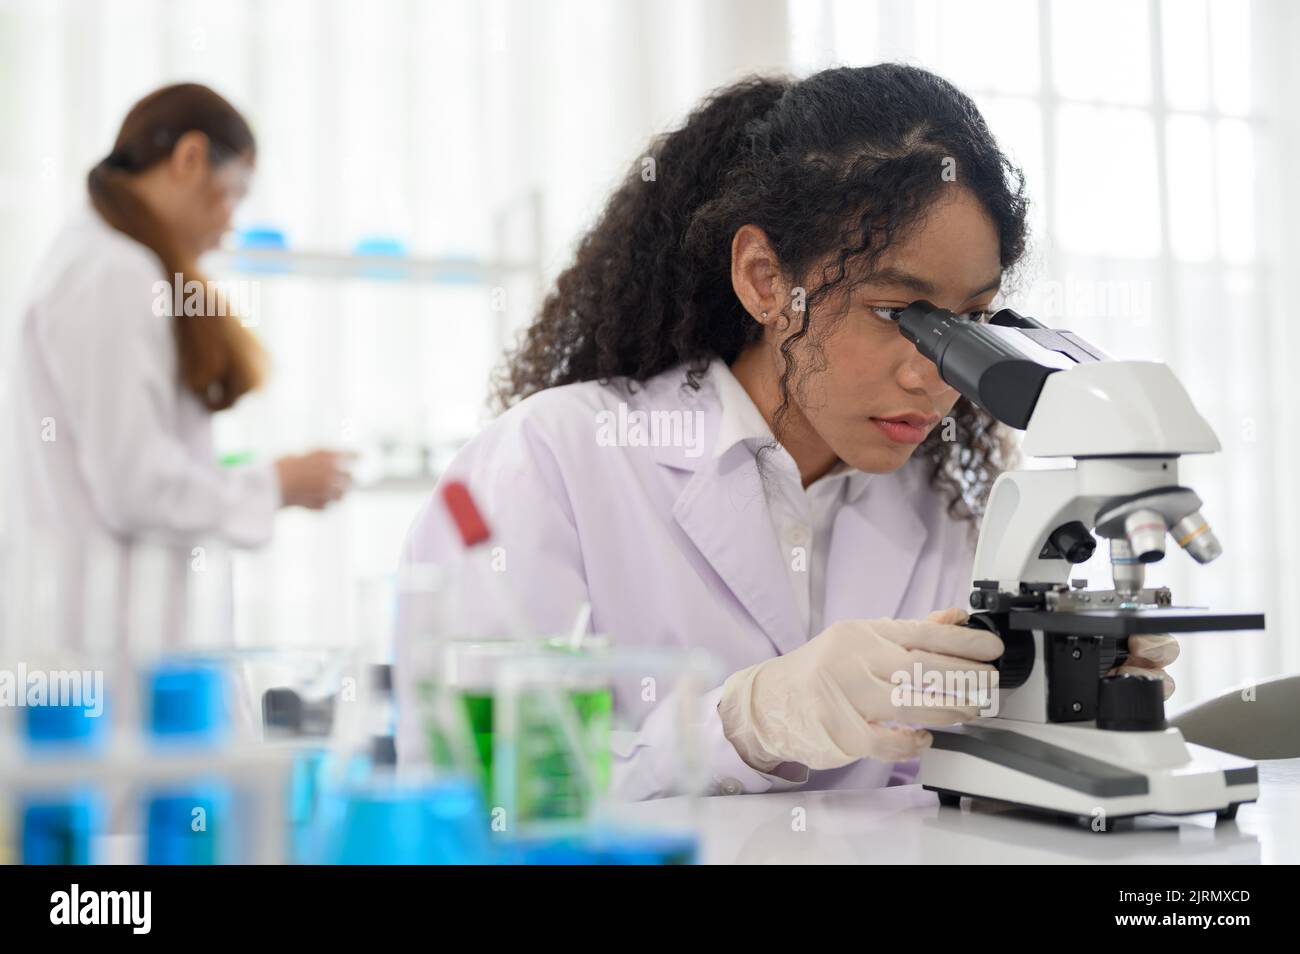 Young scientist looking in microscope while working on medical research in science laboratory Stock Photo